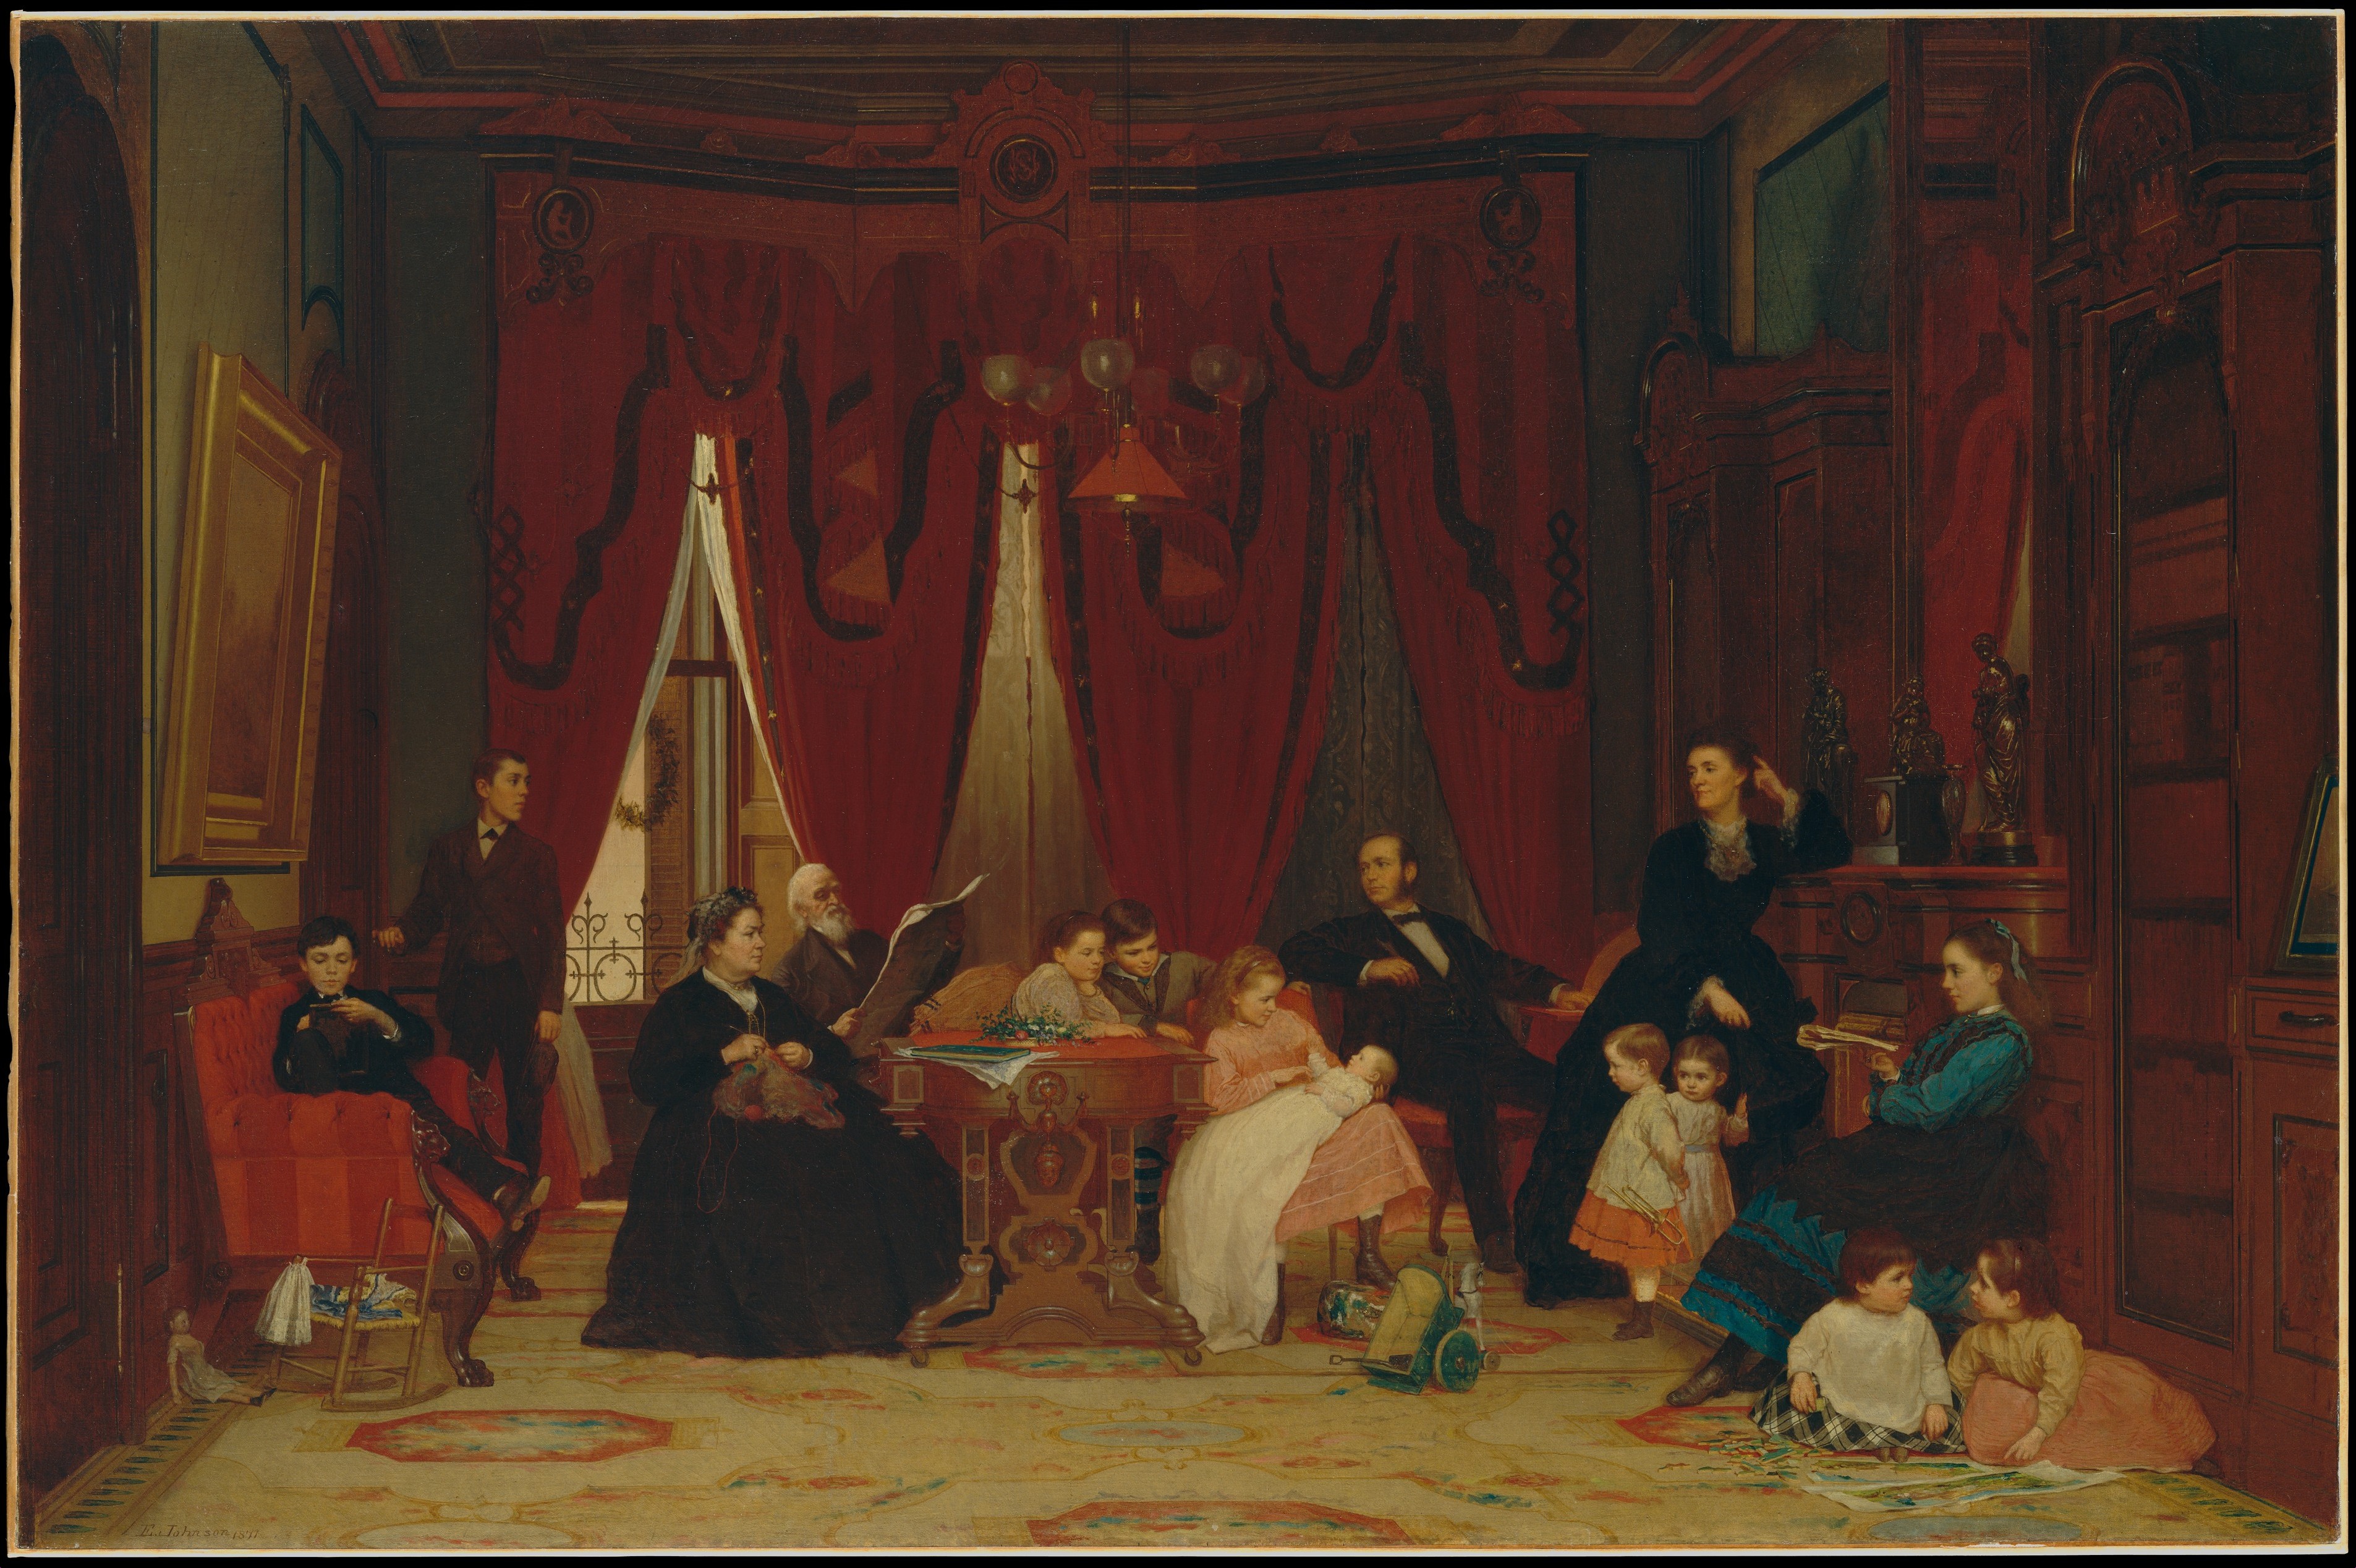 Painting of the Hatch Family by Eastman Johnson